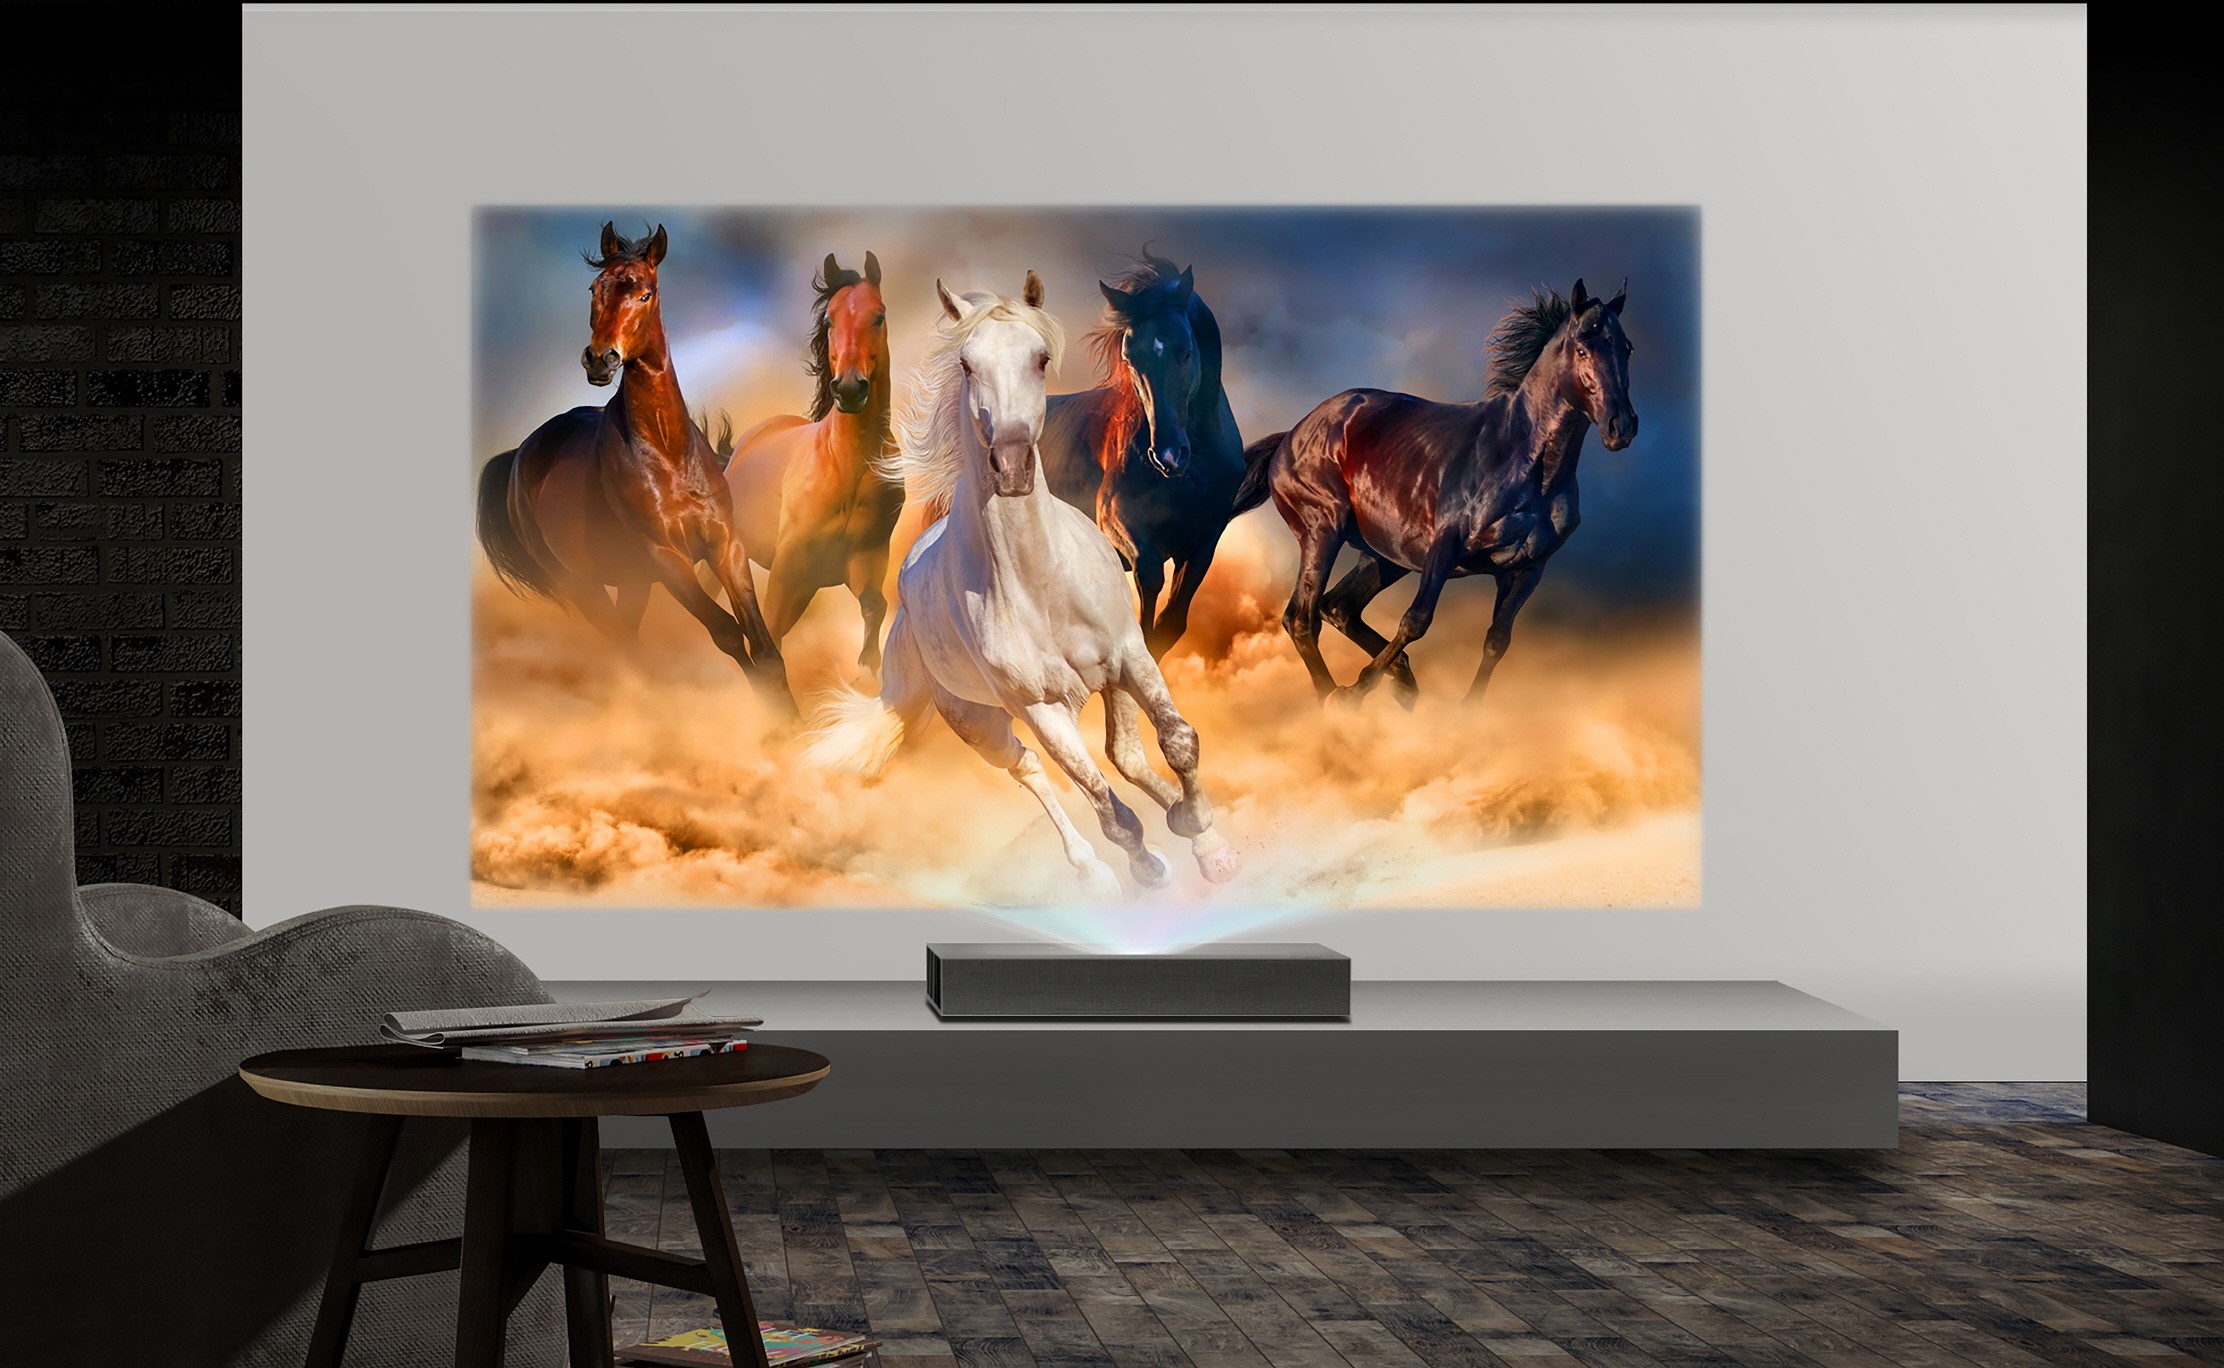 A view of LG CineBeam 4K UHD projector model HU85L producing images of running horses in a low-lit room